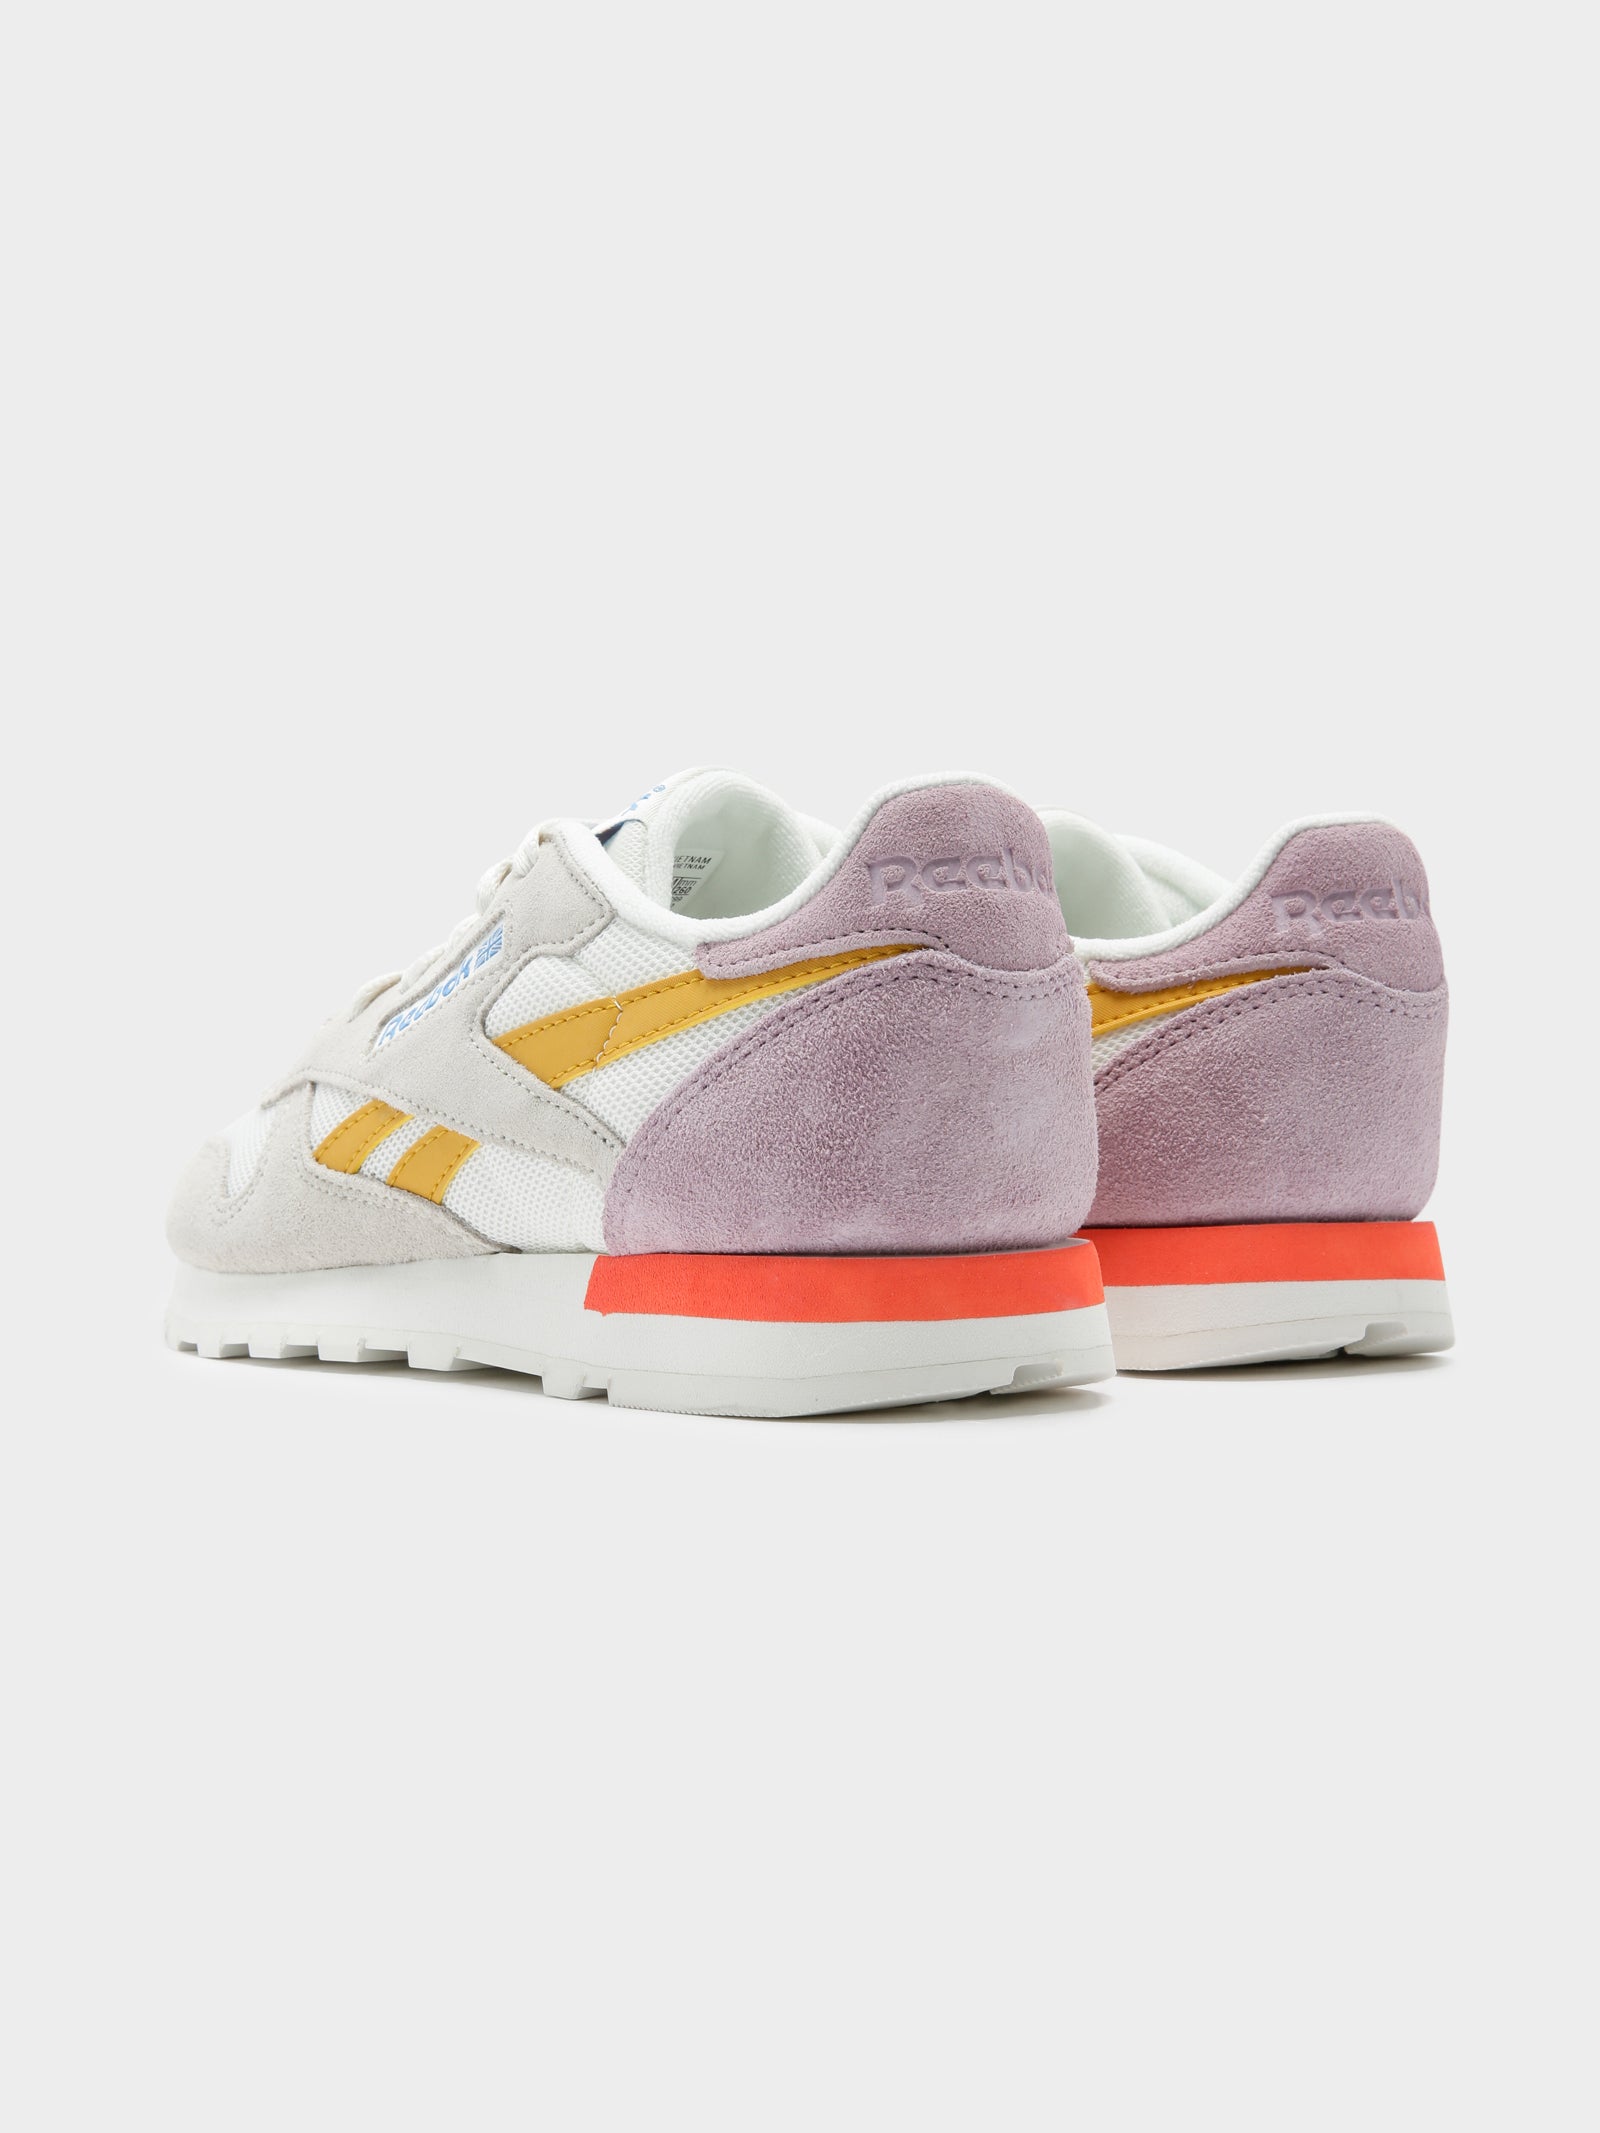 Womens Classic Leather Sneakers in Chalk, Ochre & Lilac